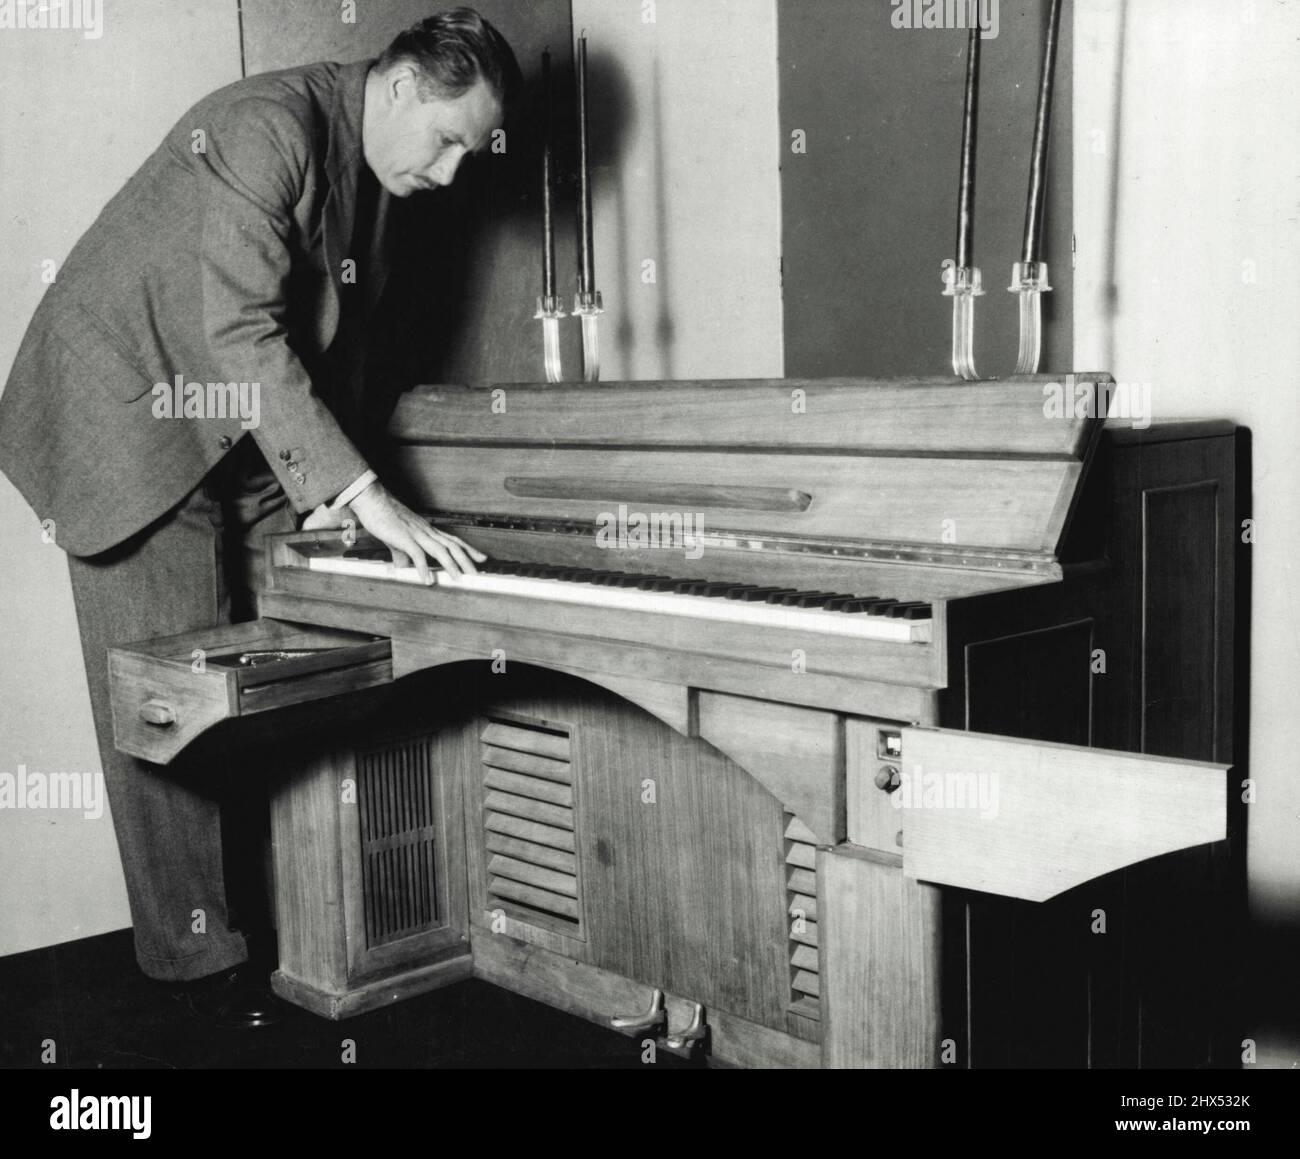 The Dynatone - It Possesses full 88 notes of grand of grand piano. Key-board  is of standard height. Drawer on left houses phonograph turntables. On  right is radio loud-speakers are mounted begin